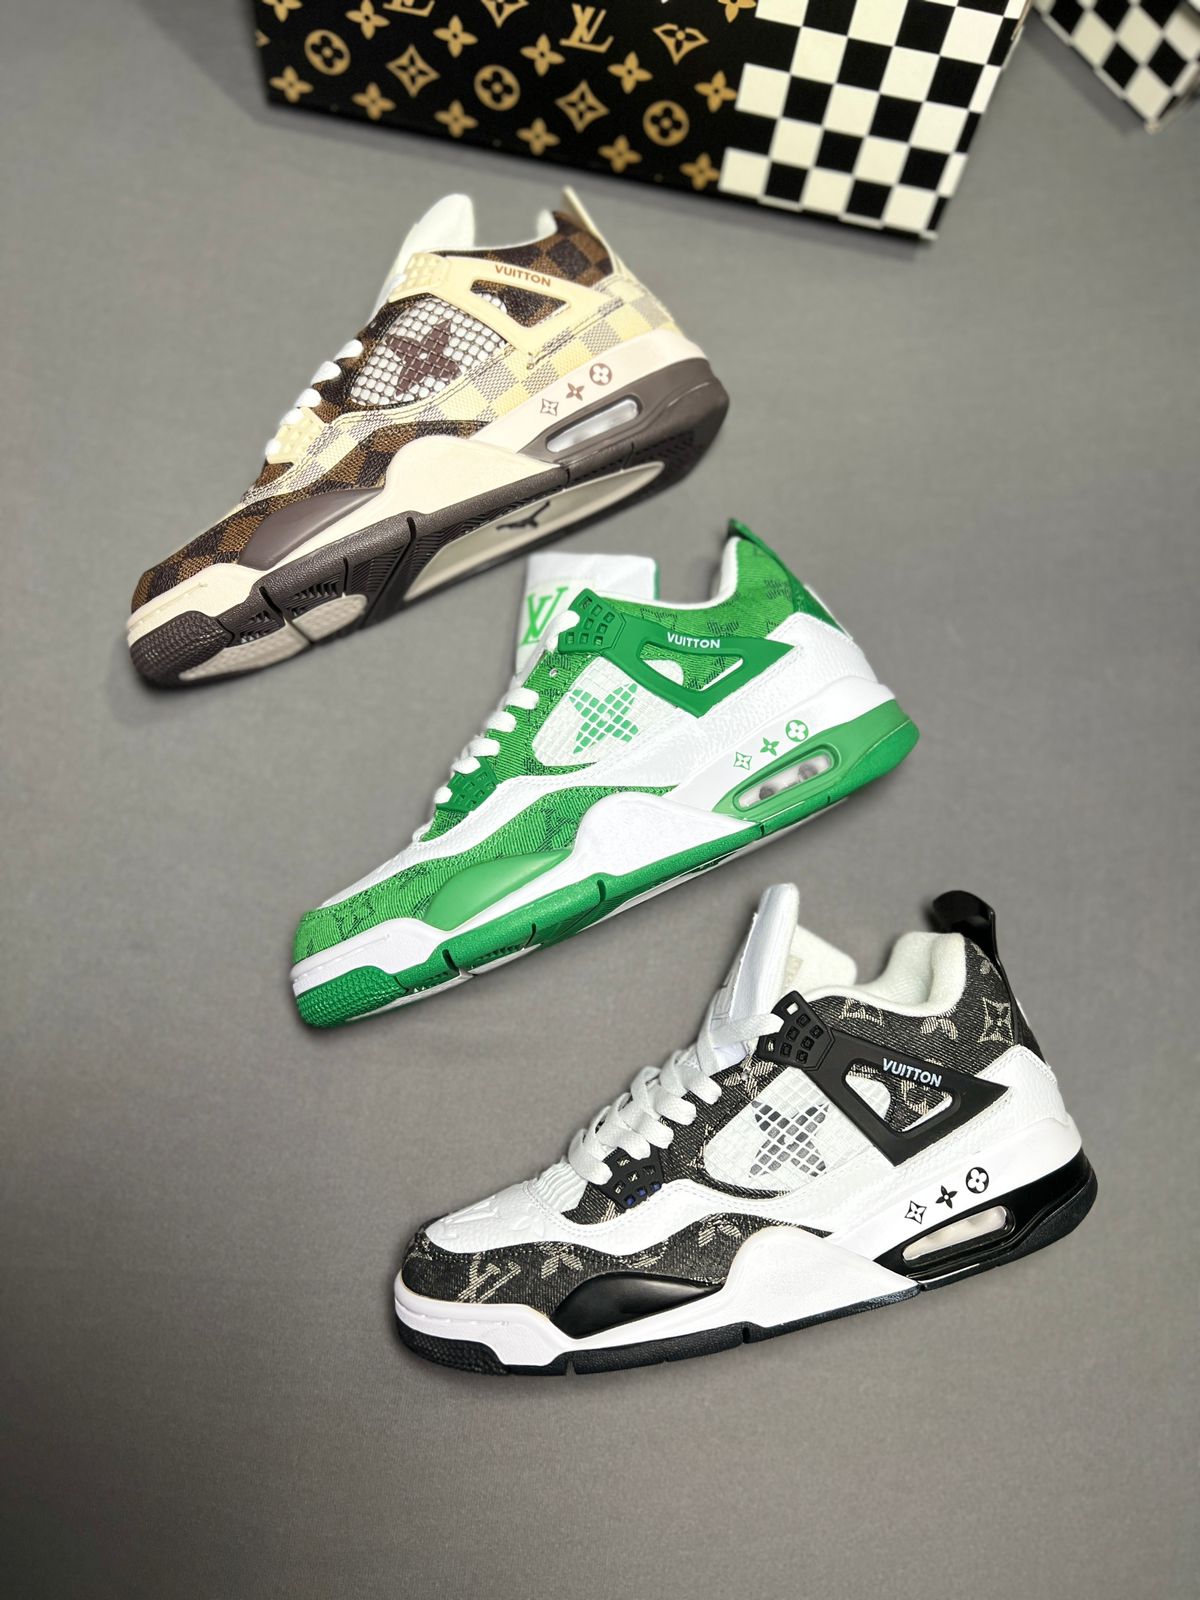 Retro Four Lv Edition Sneakers Limited Stock